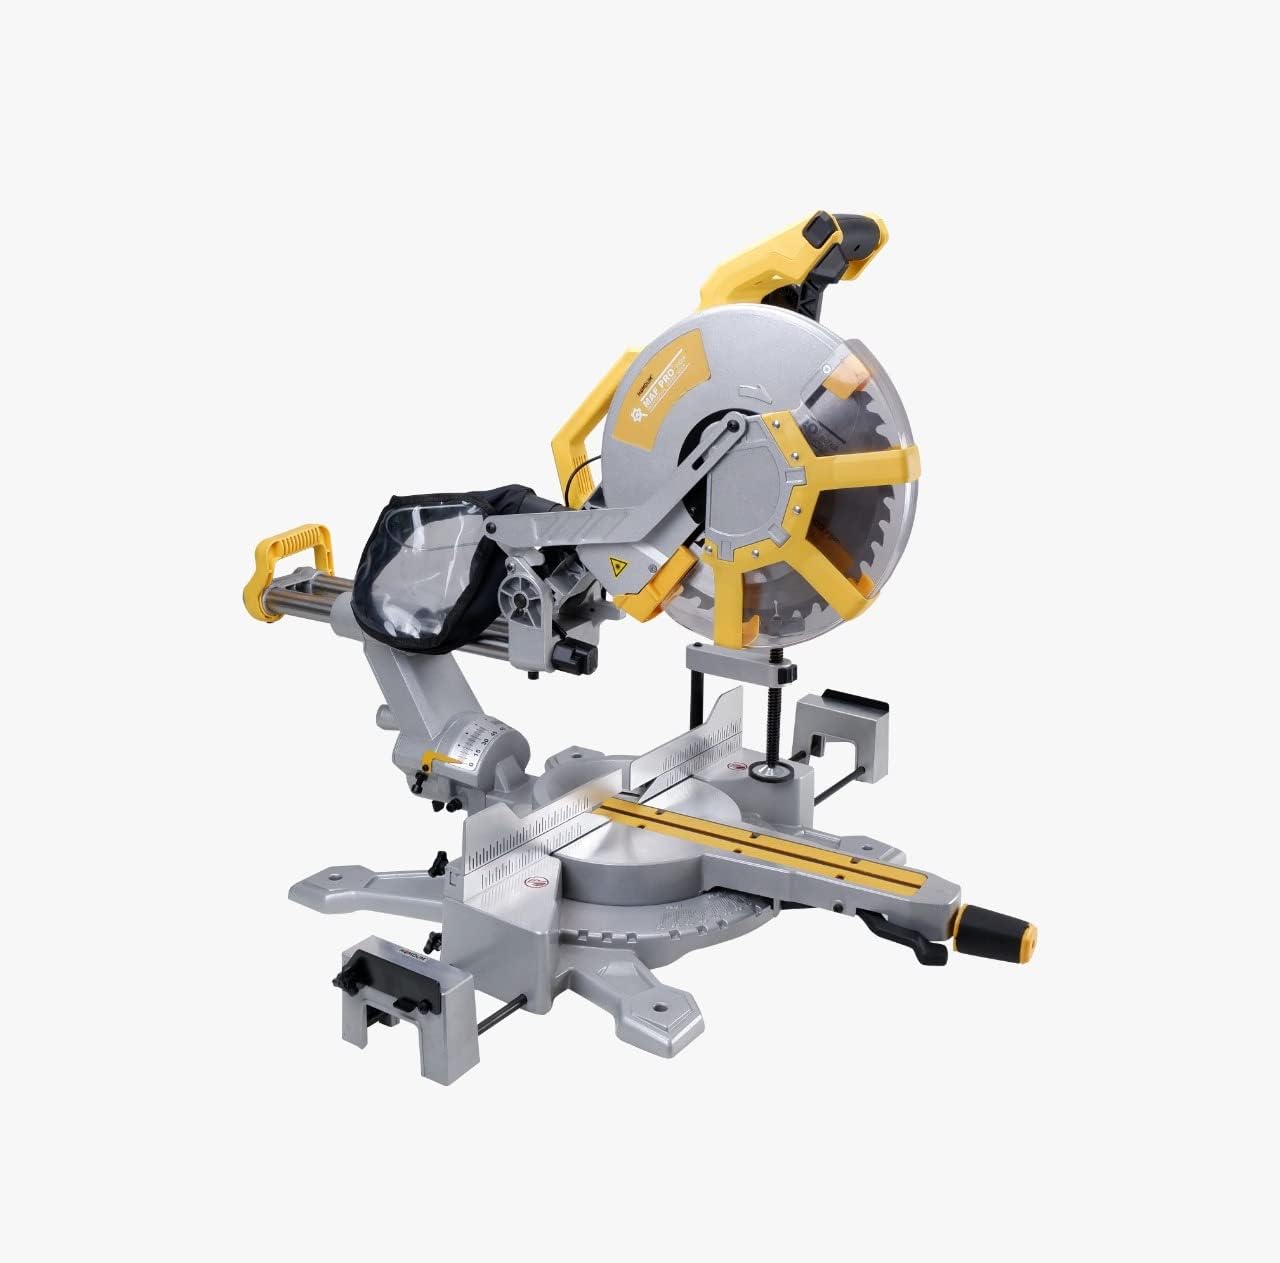 MAF PRO MMS240018 12-Inch Electric Mitre Saw 2400W Heavy Duty 5000 RPM, 305mm Blade Dia for Wood Furniture Aluminum Pipe Cutter